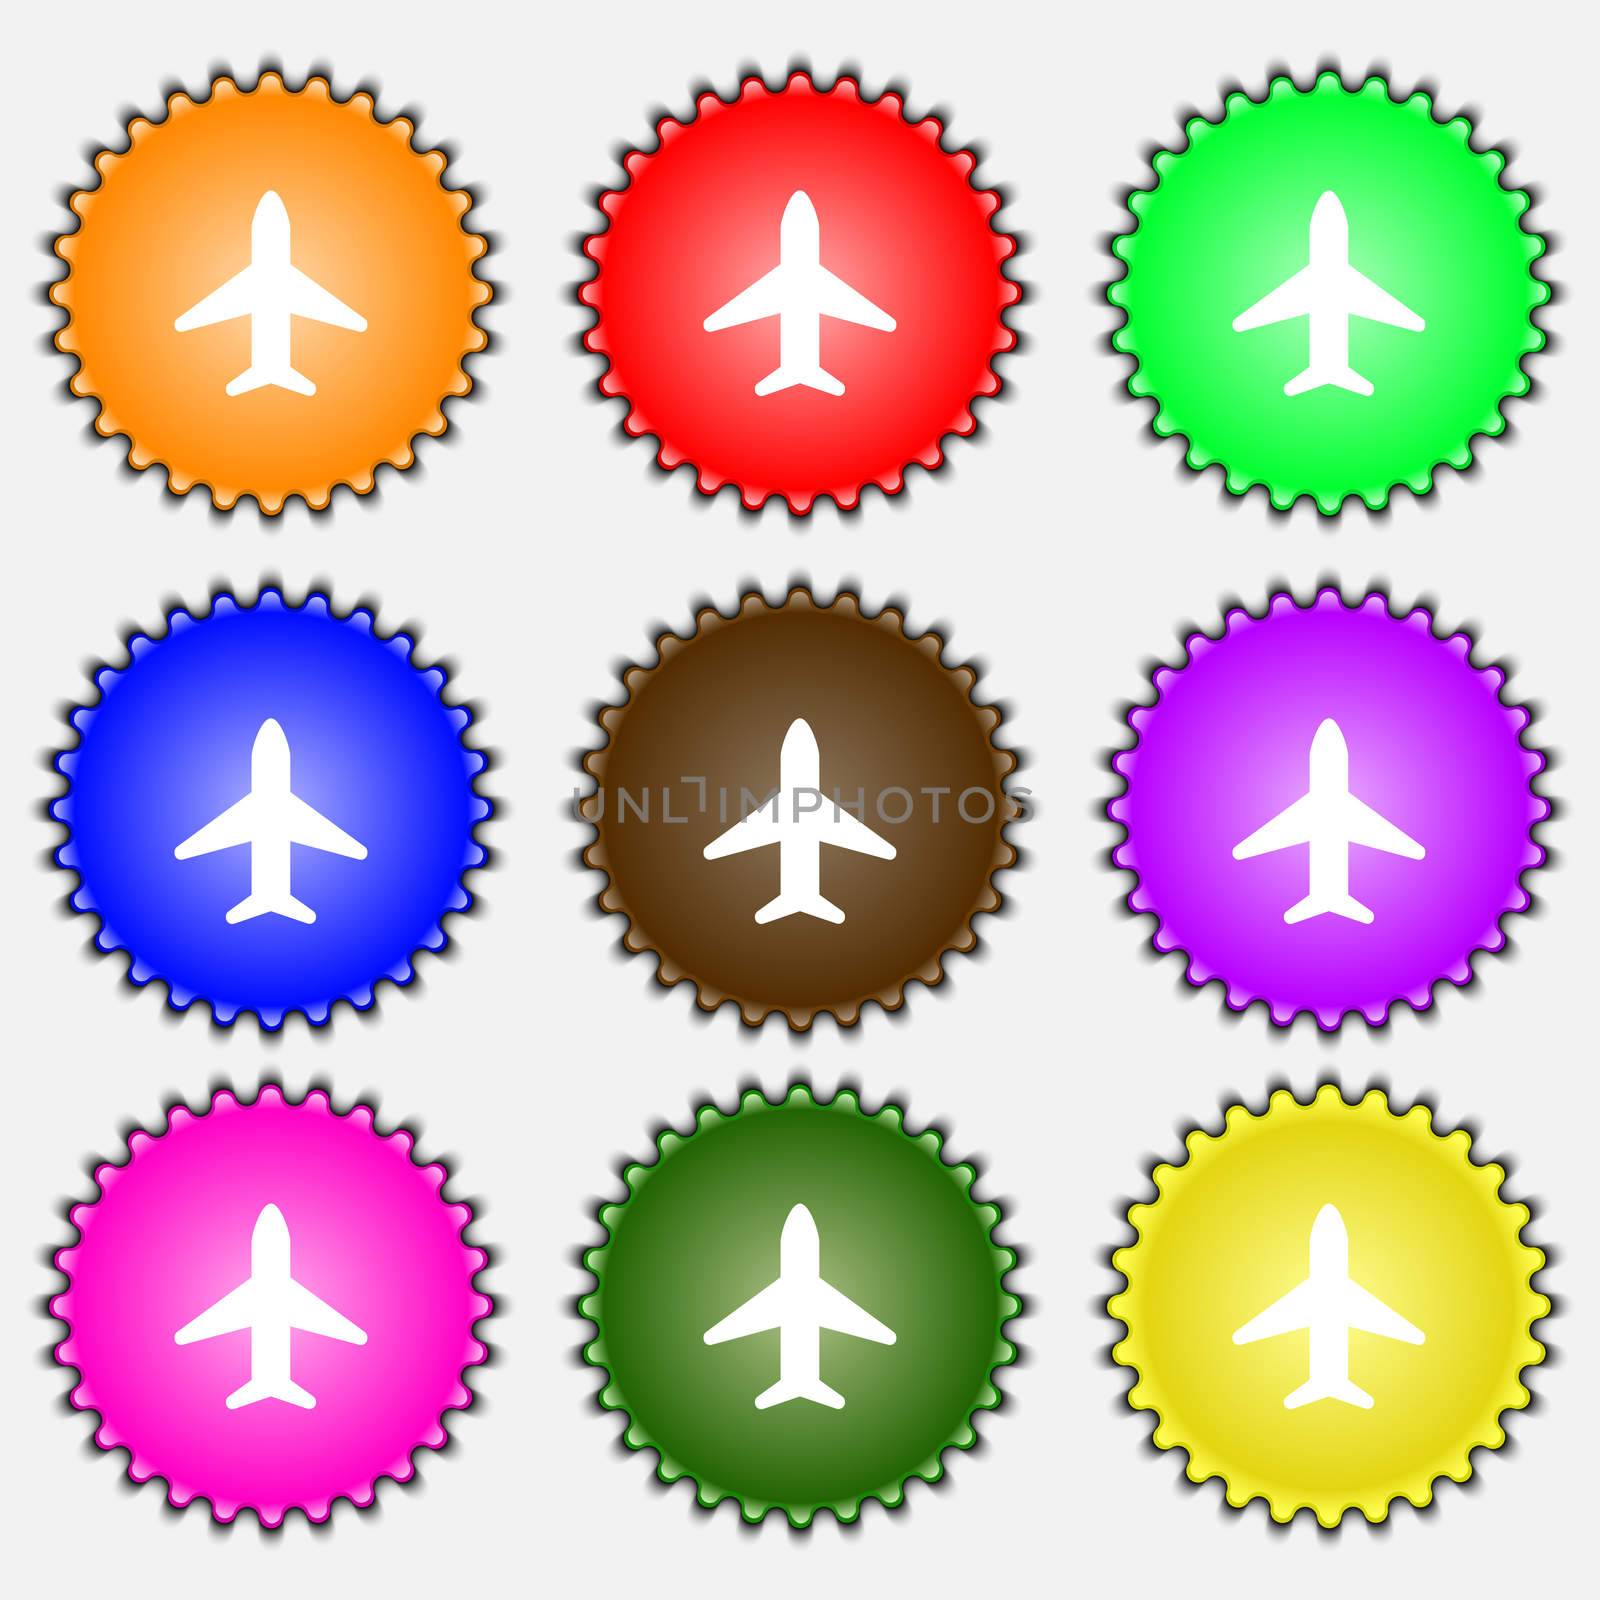 Airplane, Plane, Travel, Flight icon sign. A set of nine different colored labels.  by serhii_lohvyniuk